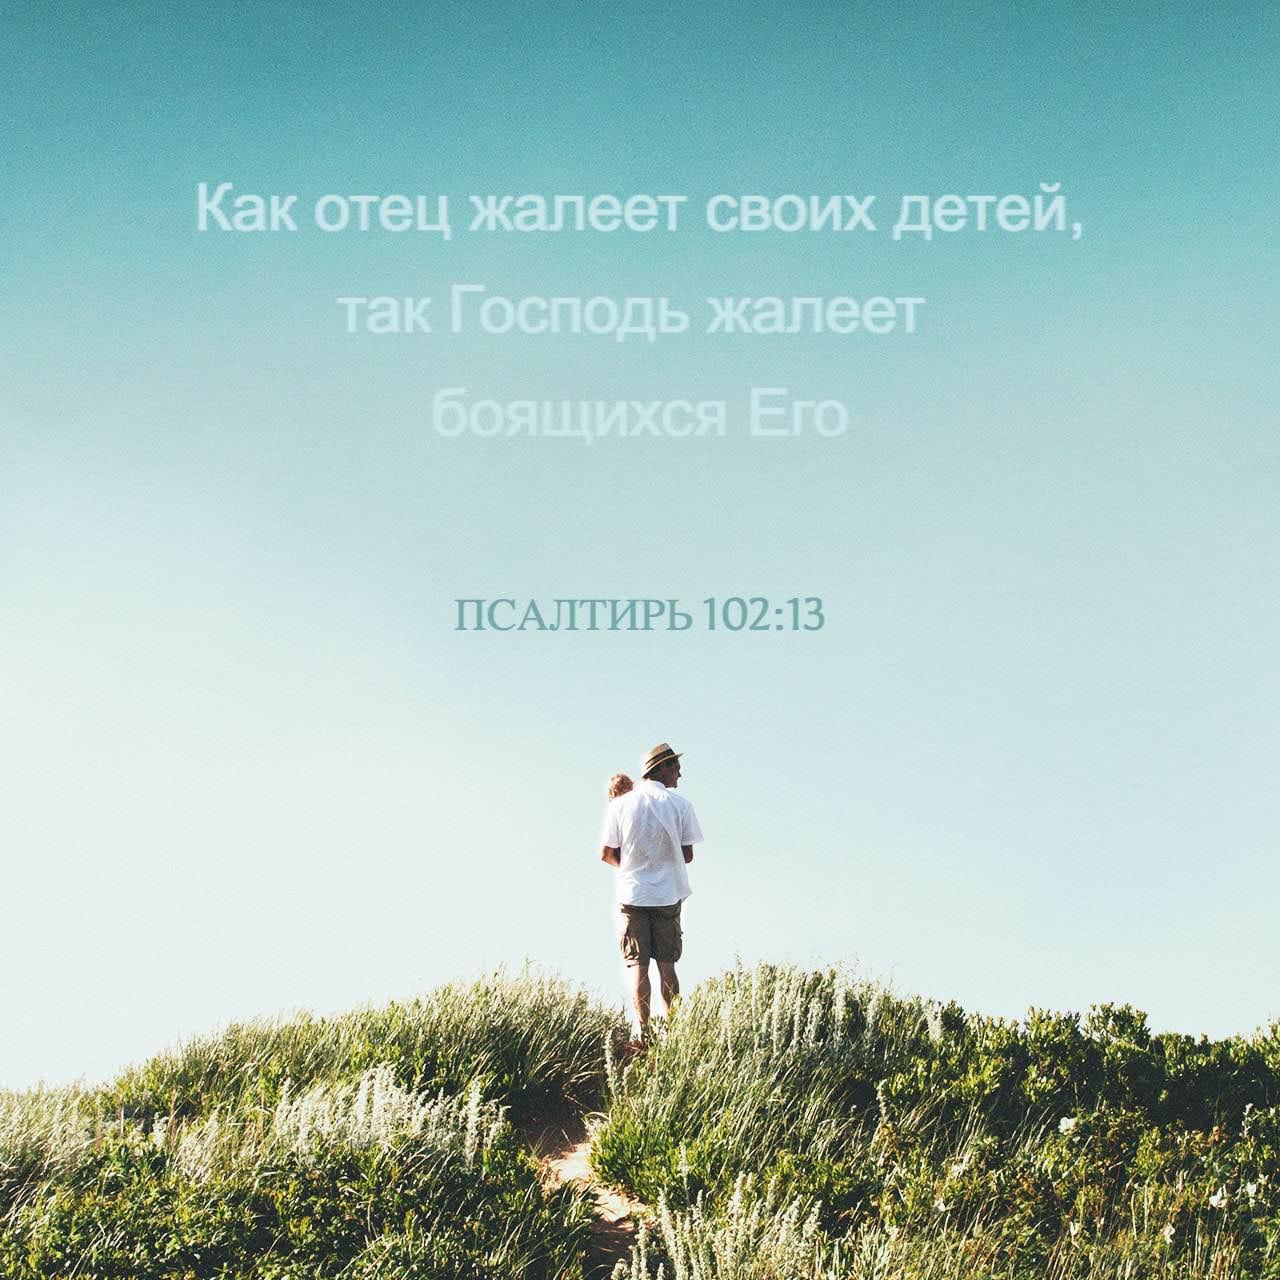 Bible Verse of the Day - day 85 - image 36772 (Псалтирь 102:13)